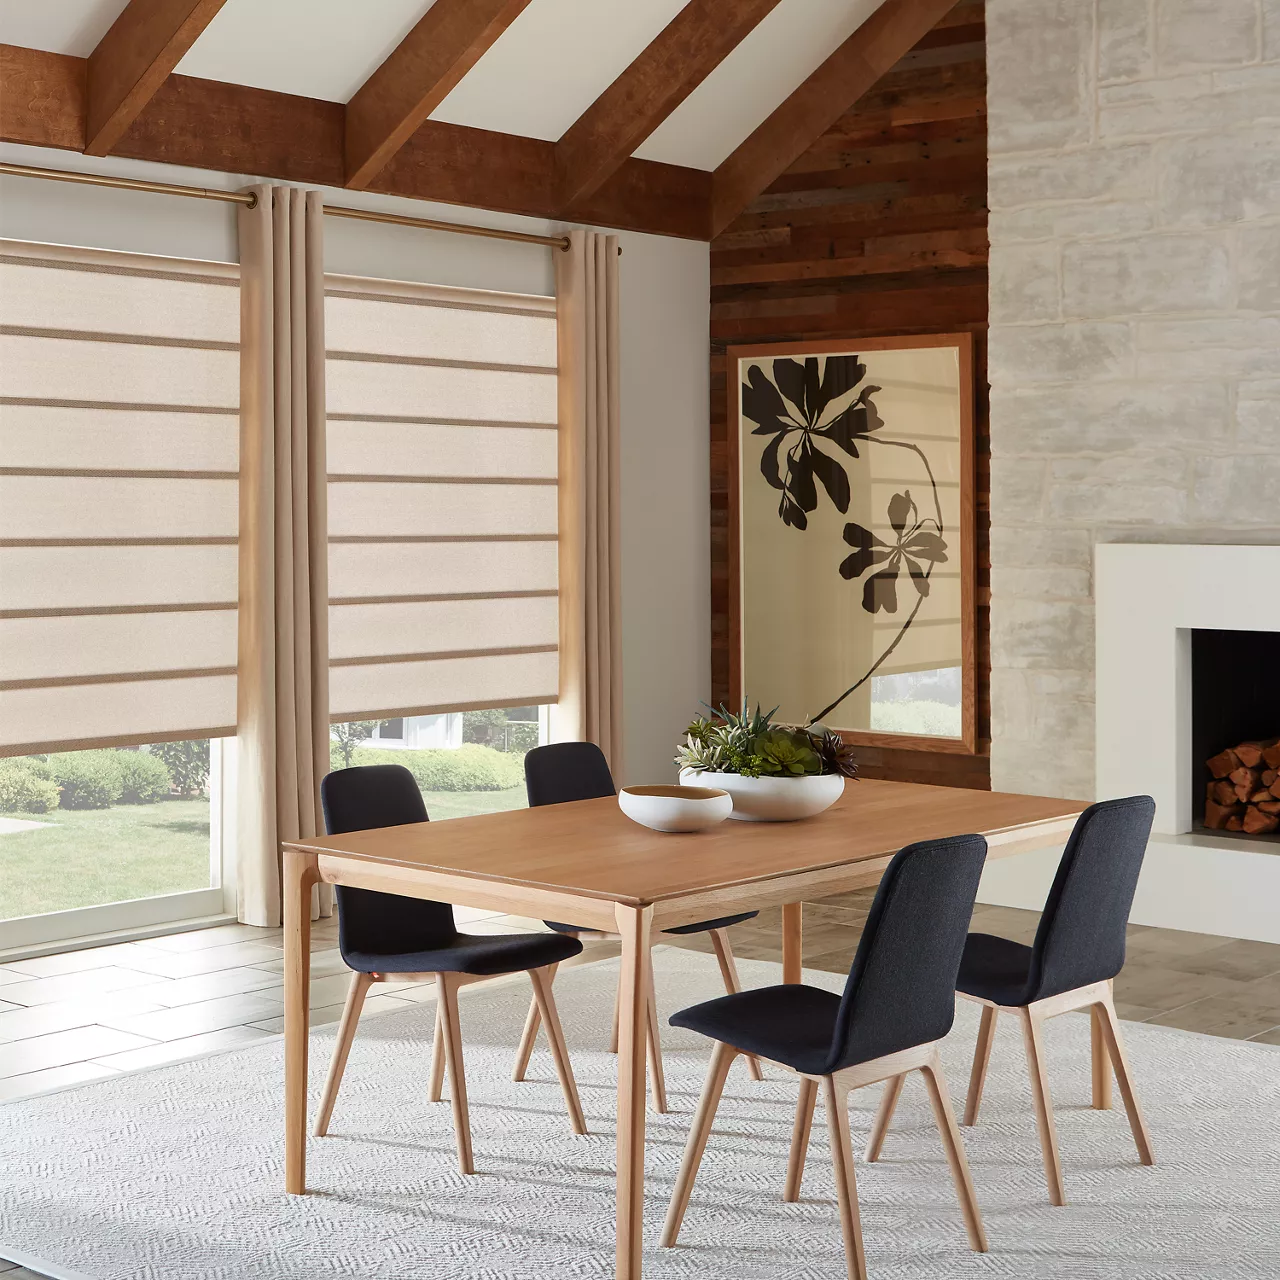 Hunter Douglas Alustra® Architectural Roller Shades near Lutherville-Timonium, Maryland (MD) (6)